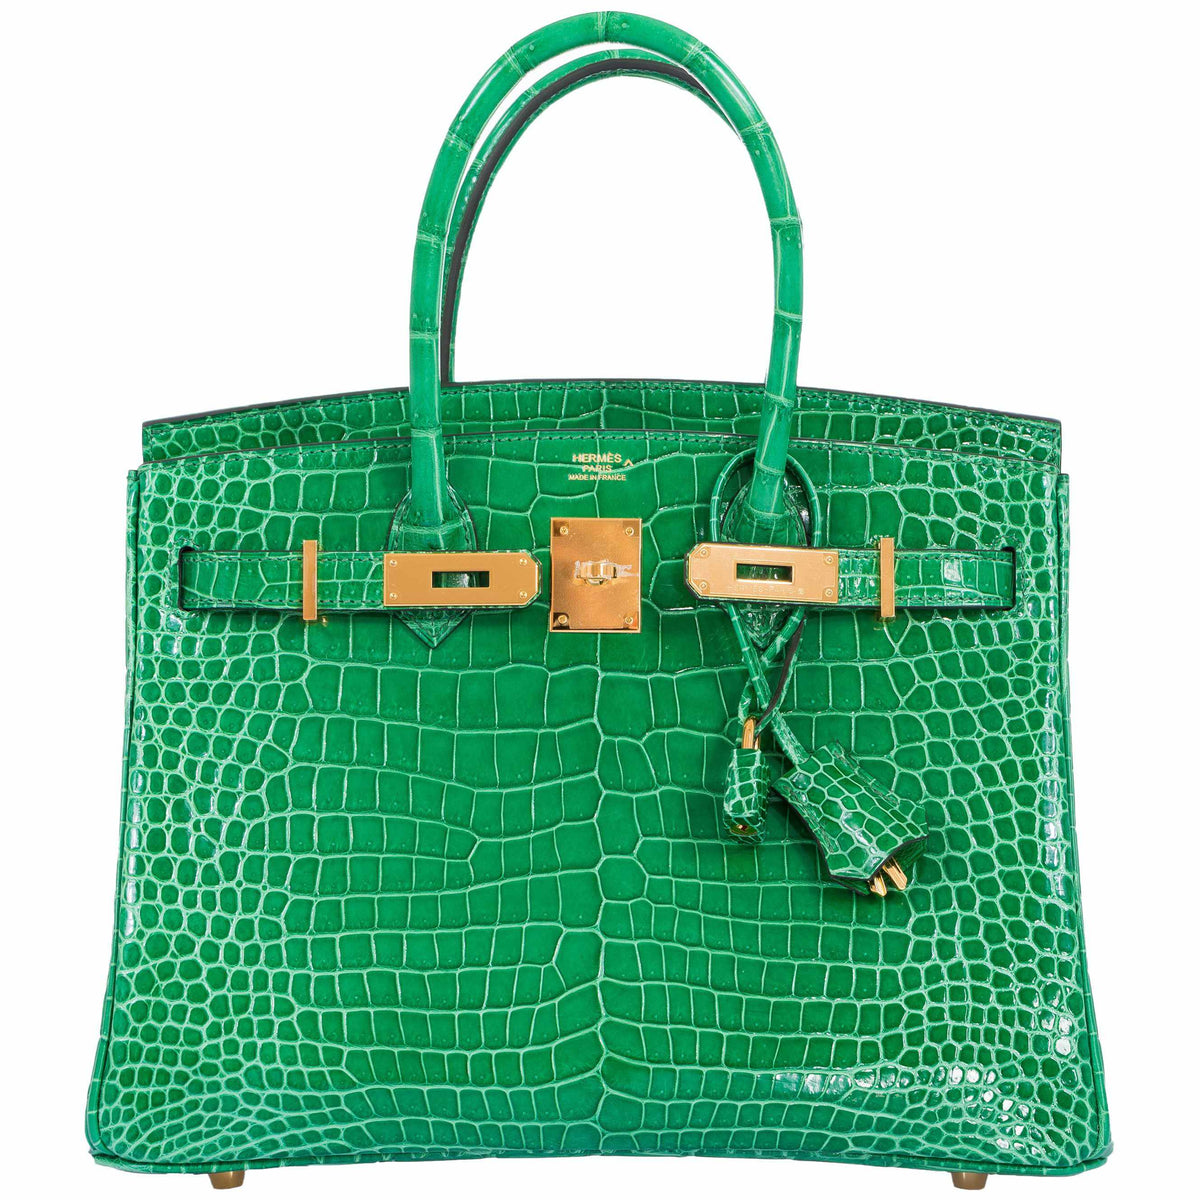 An absolute SHOWSTOPPER! The holy grail Hermes Birkin 30 in shiny porosus  crocodile leather is a rare find, and a true collector's dream!…